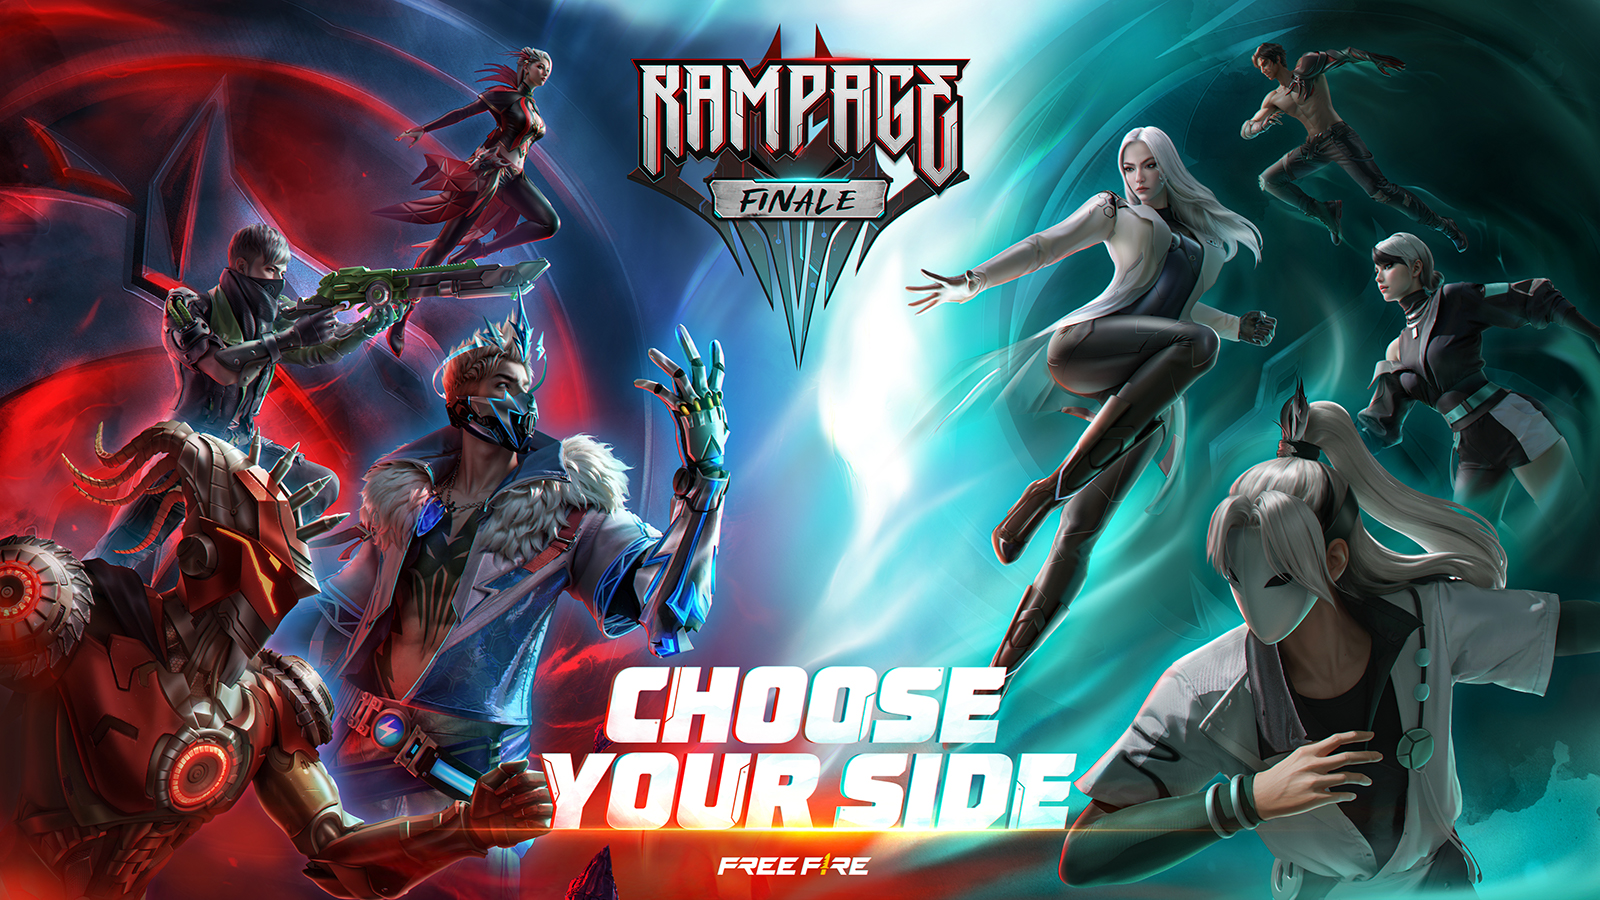 Rampage returns for its Fifth and Final Edition, Rampage: Finale